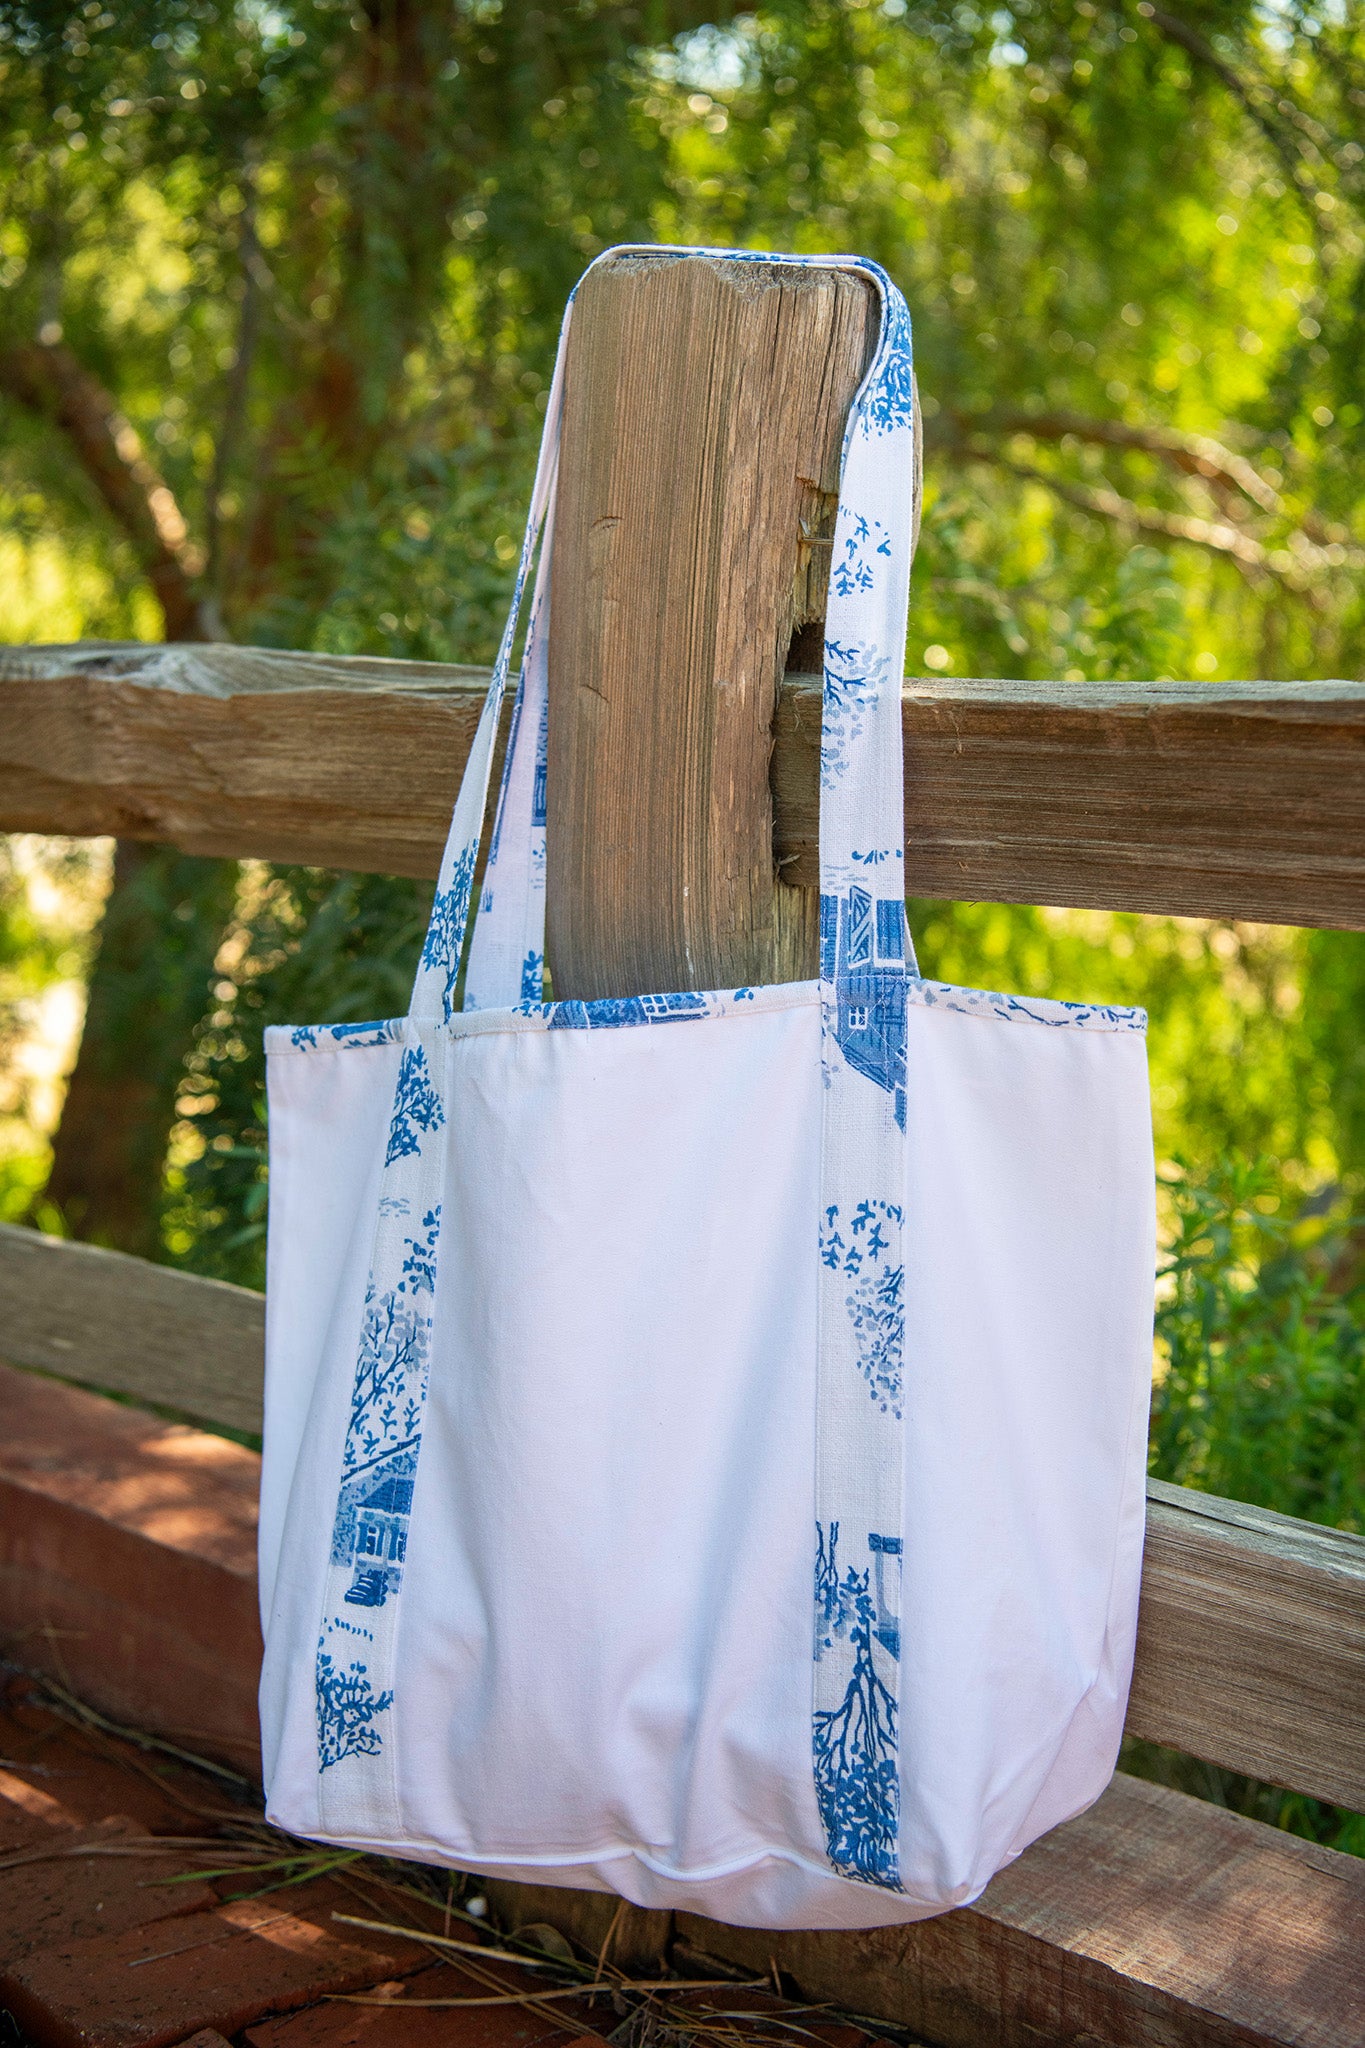 Limited-Edition '50 Years on the Prairie' Tote Bag in Blue